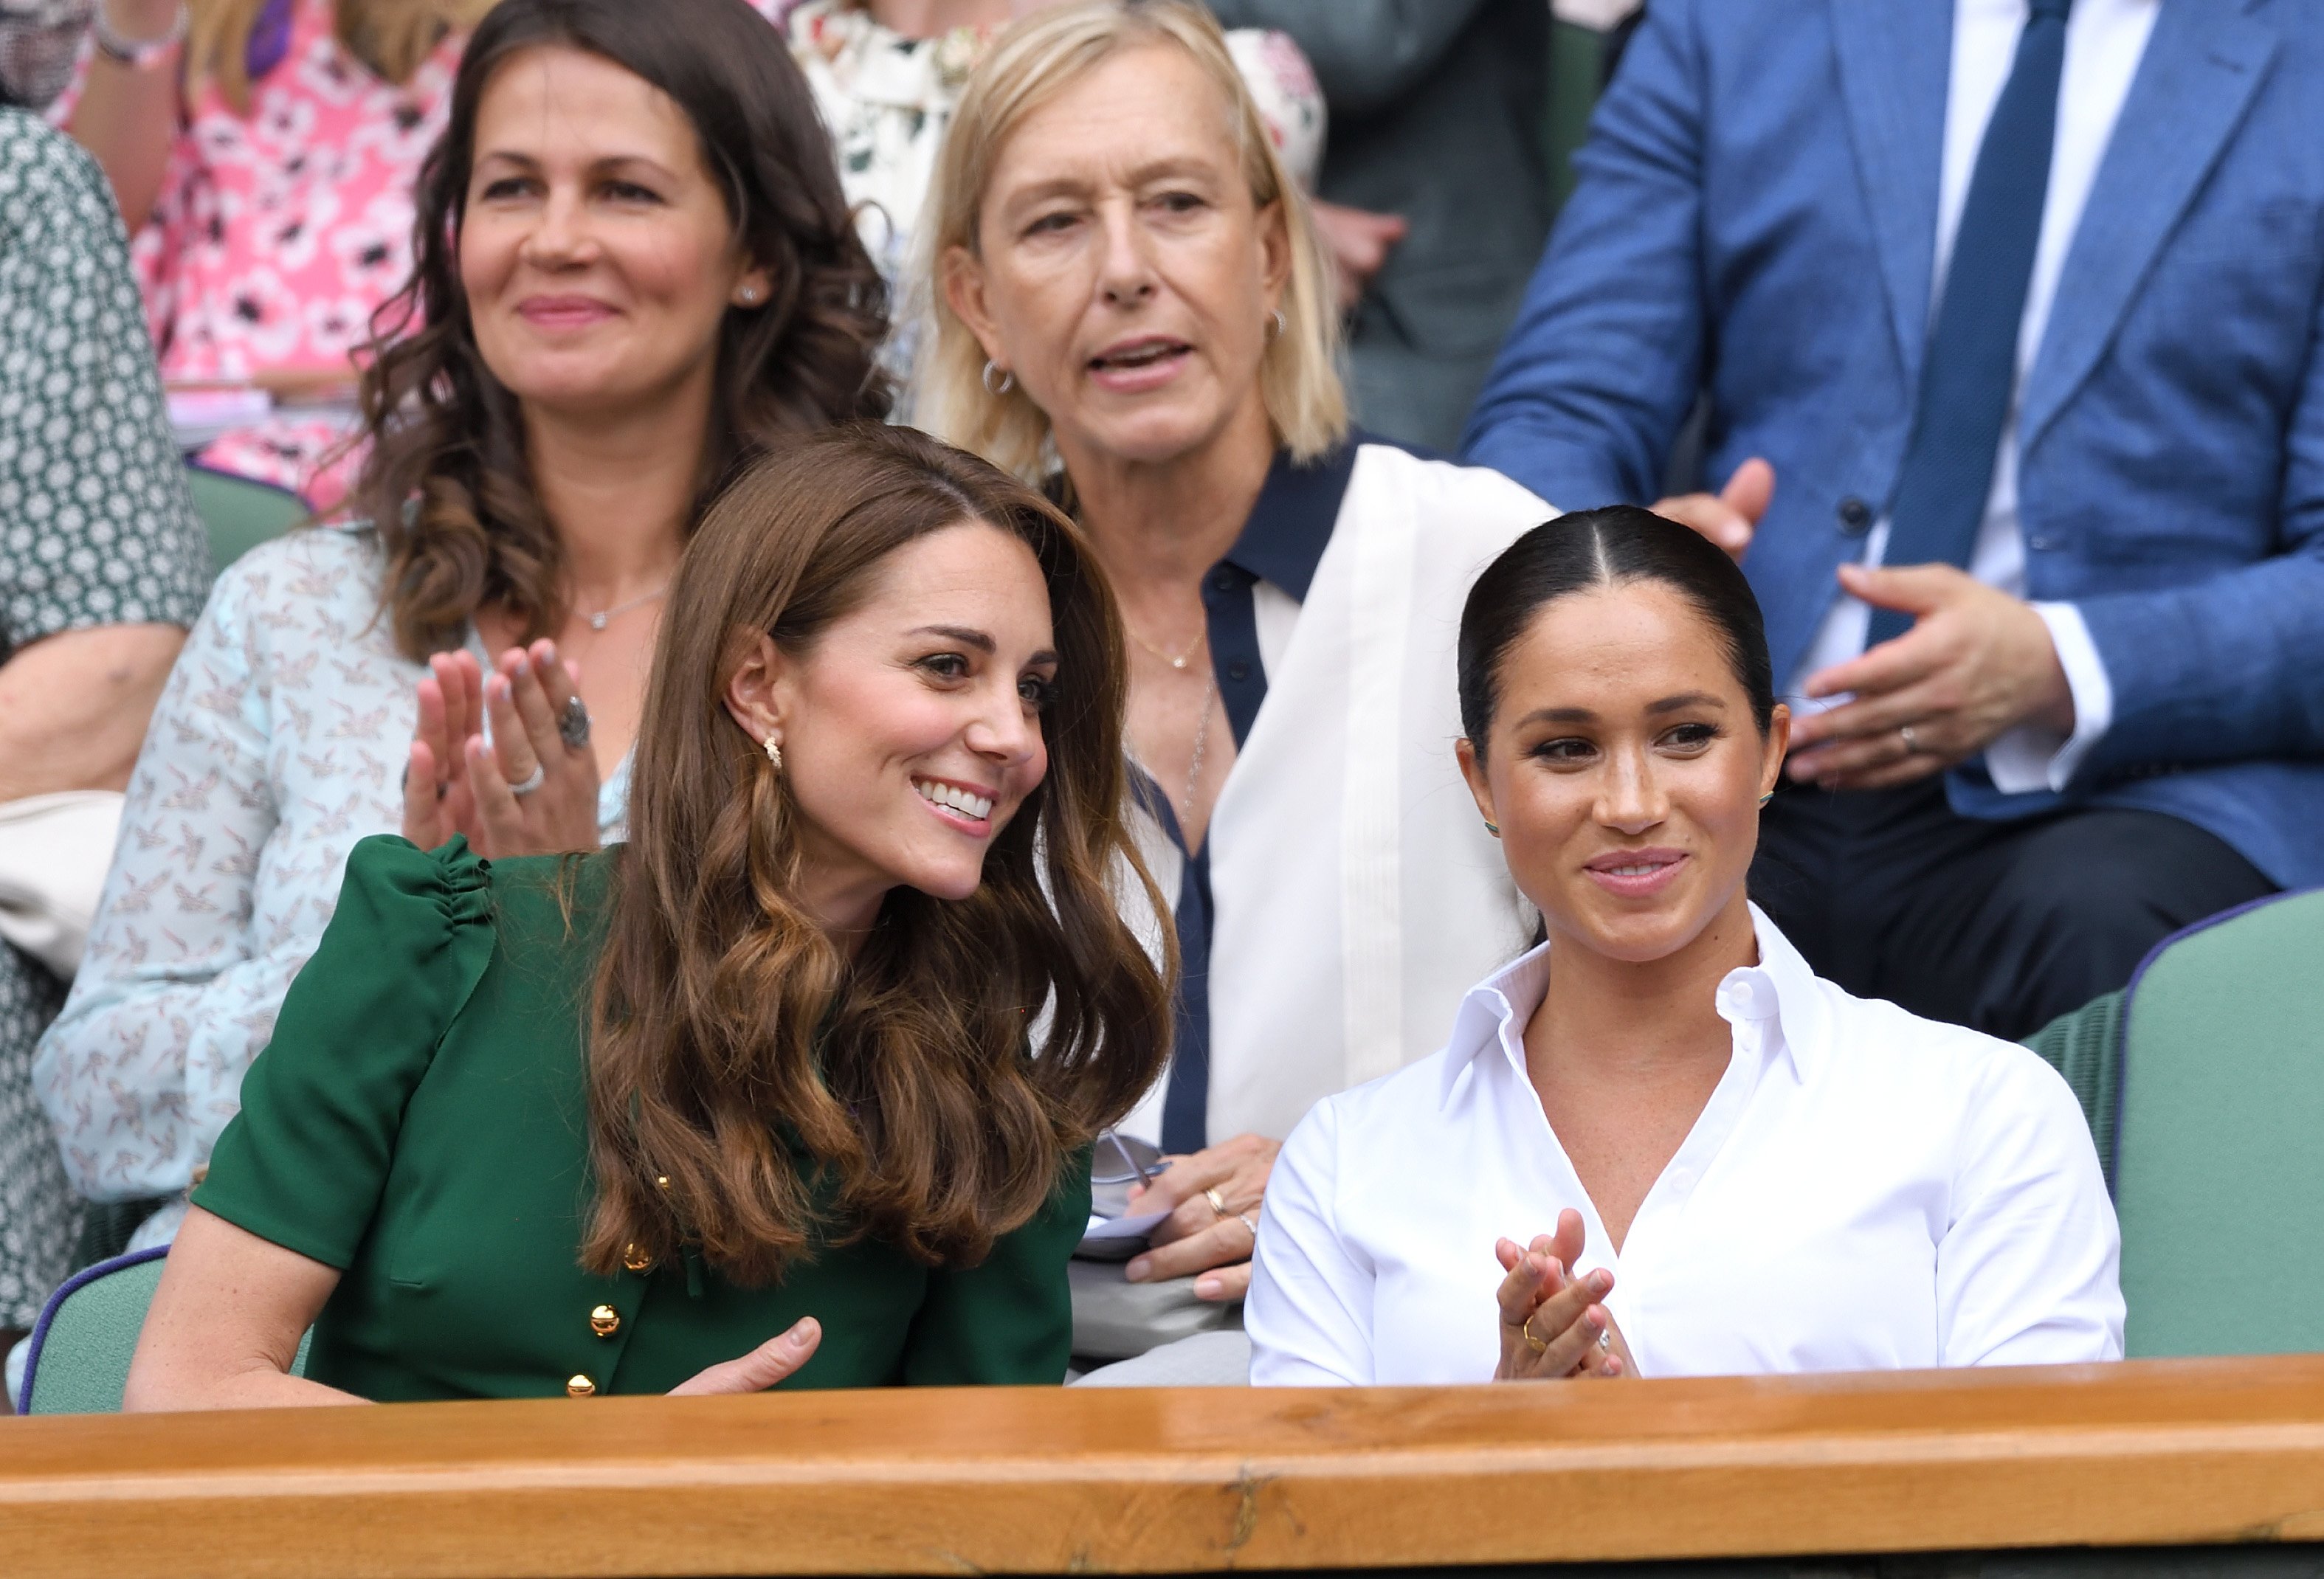 Kate Middleton and Meghan Markle at the Wimbledon Tennis Championship on July 13, 2019 | Photo: GettyImages